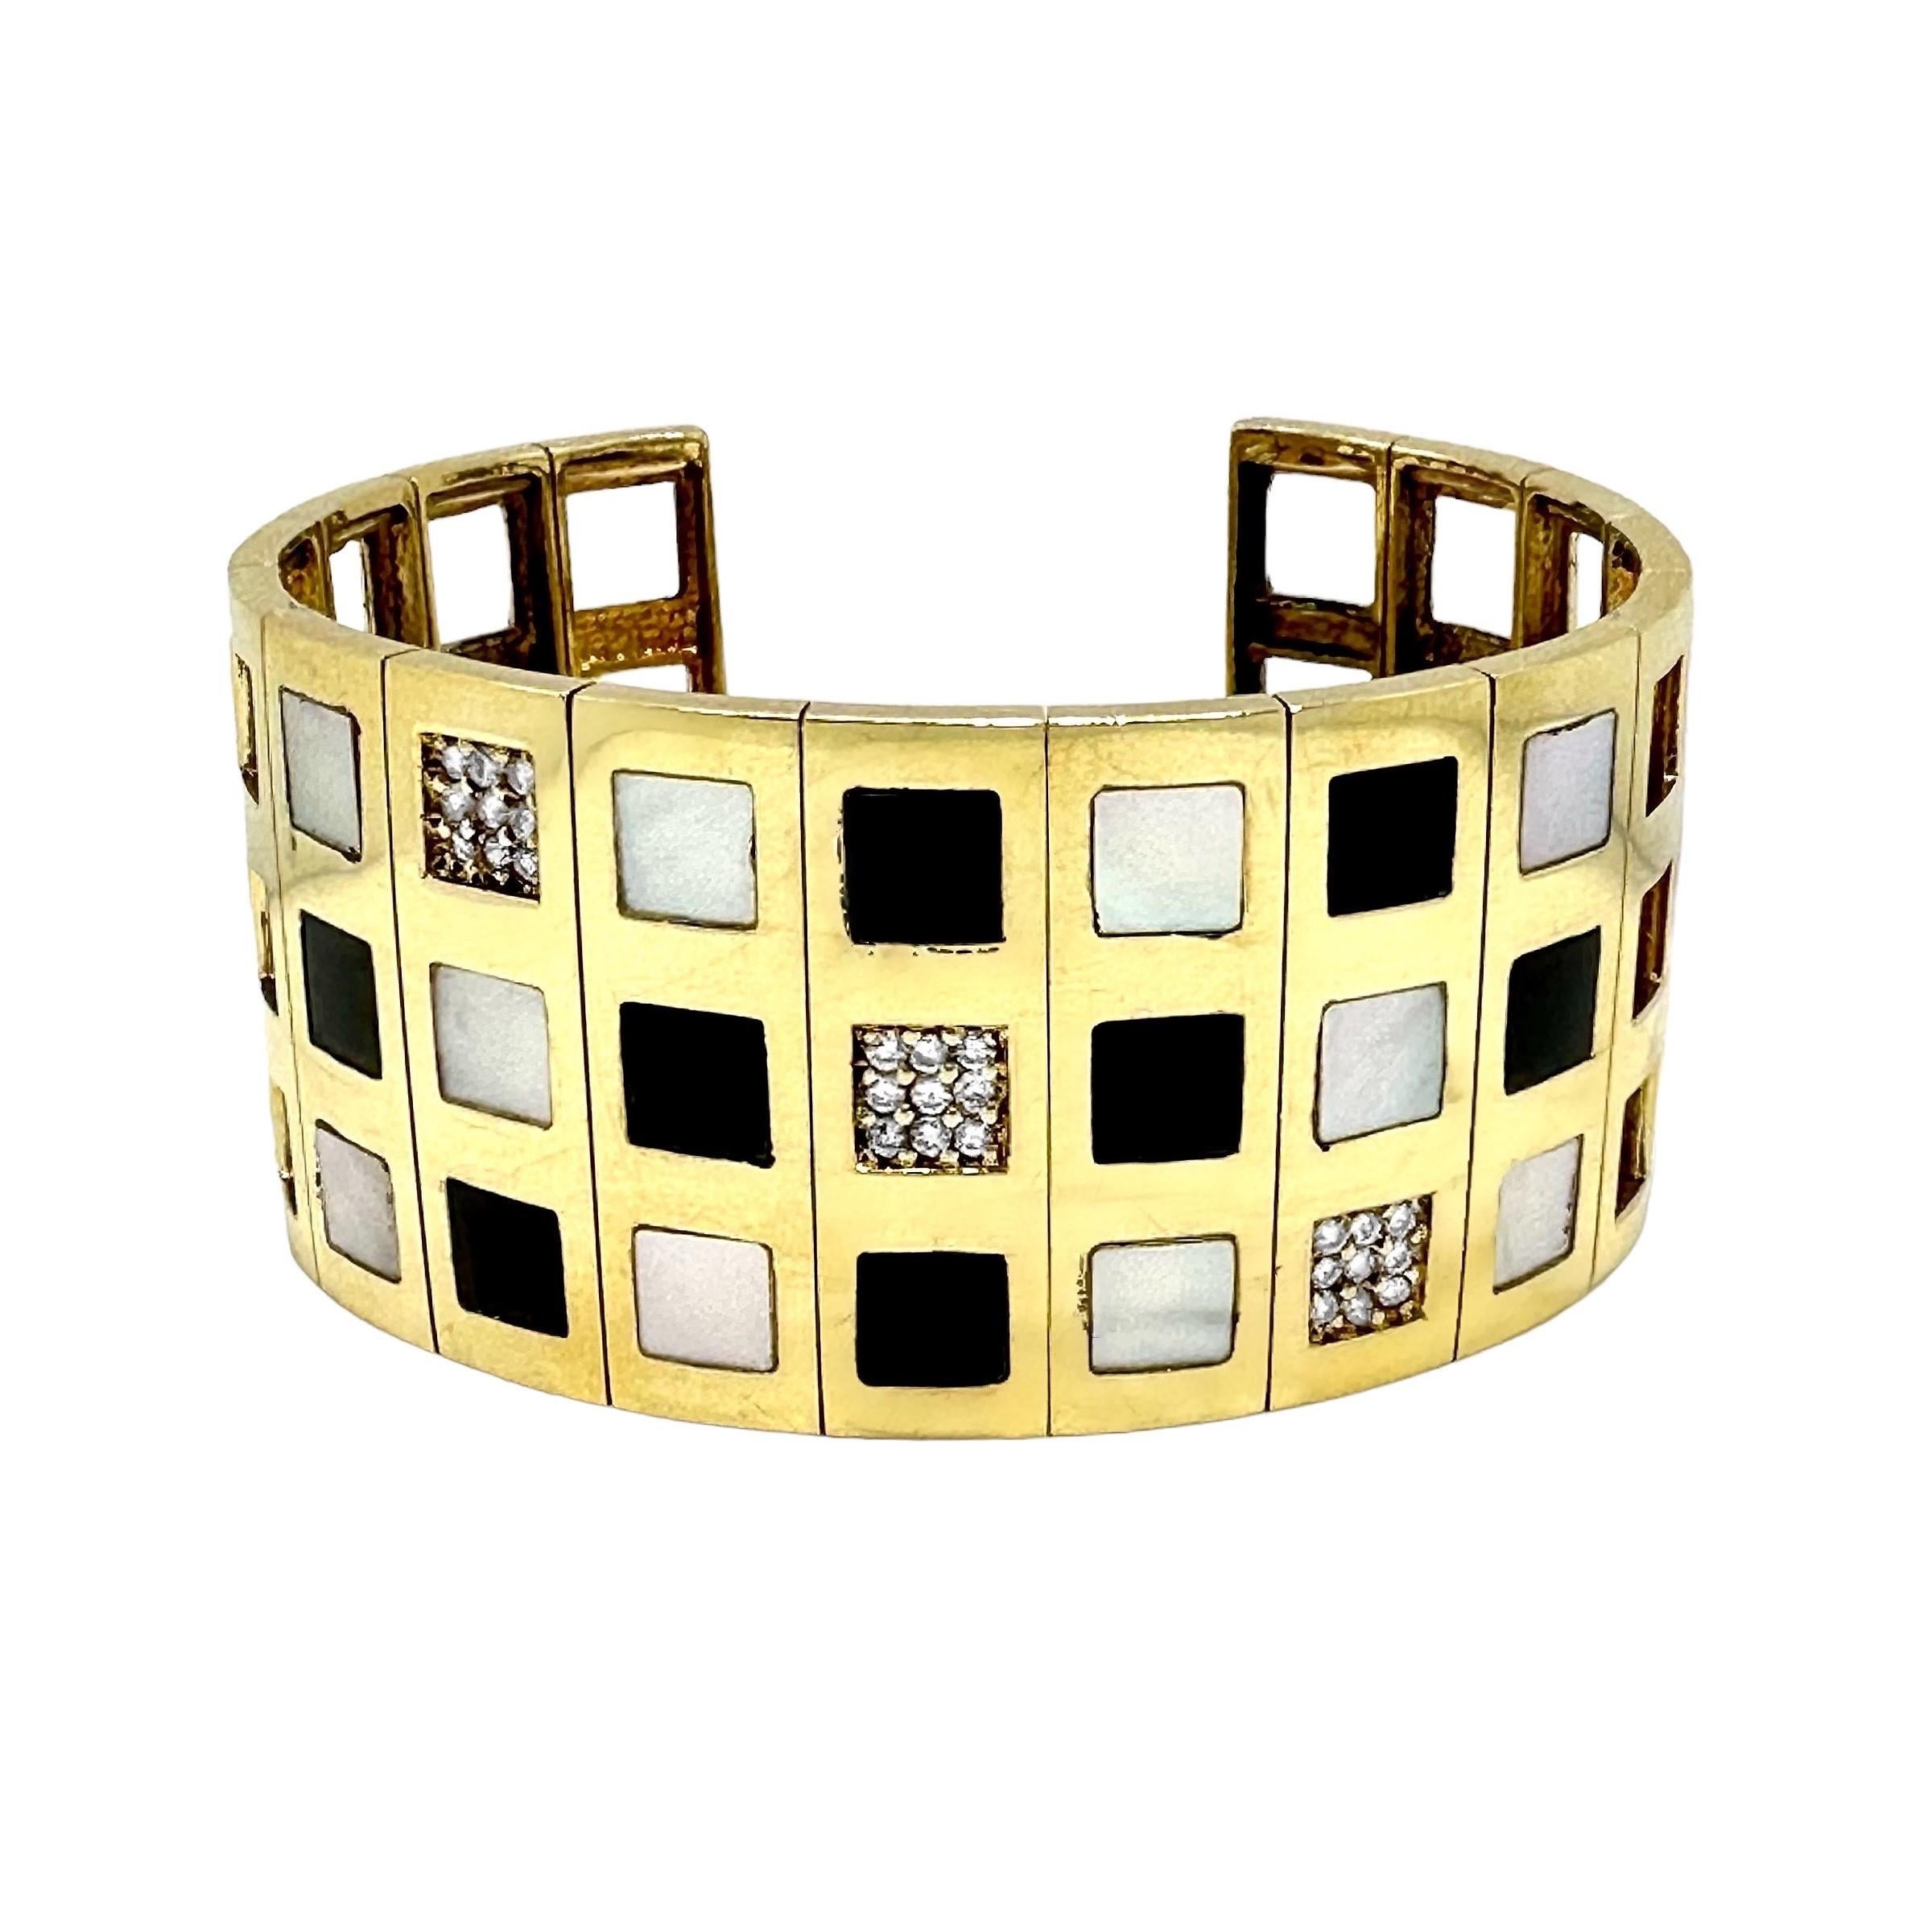 This truly striking and unmistakably 1960's bangle bracelet is set with mother of pearl, black onyx and diamond square panels. Total approximate diamond weight is .50ct of overall G/H color and VS2 clarity.  It is open at the back and easily flexes